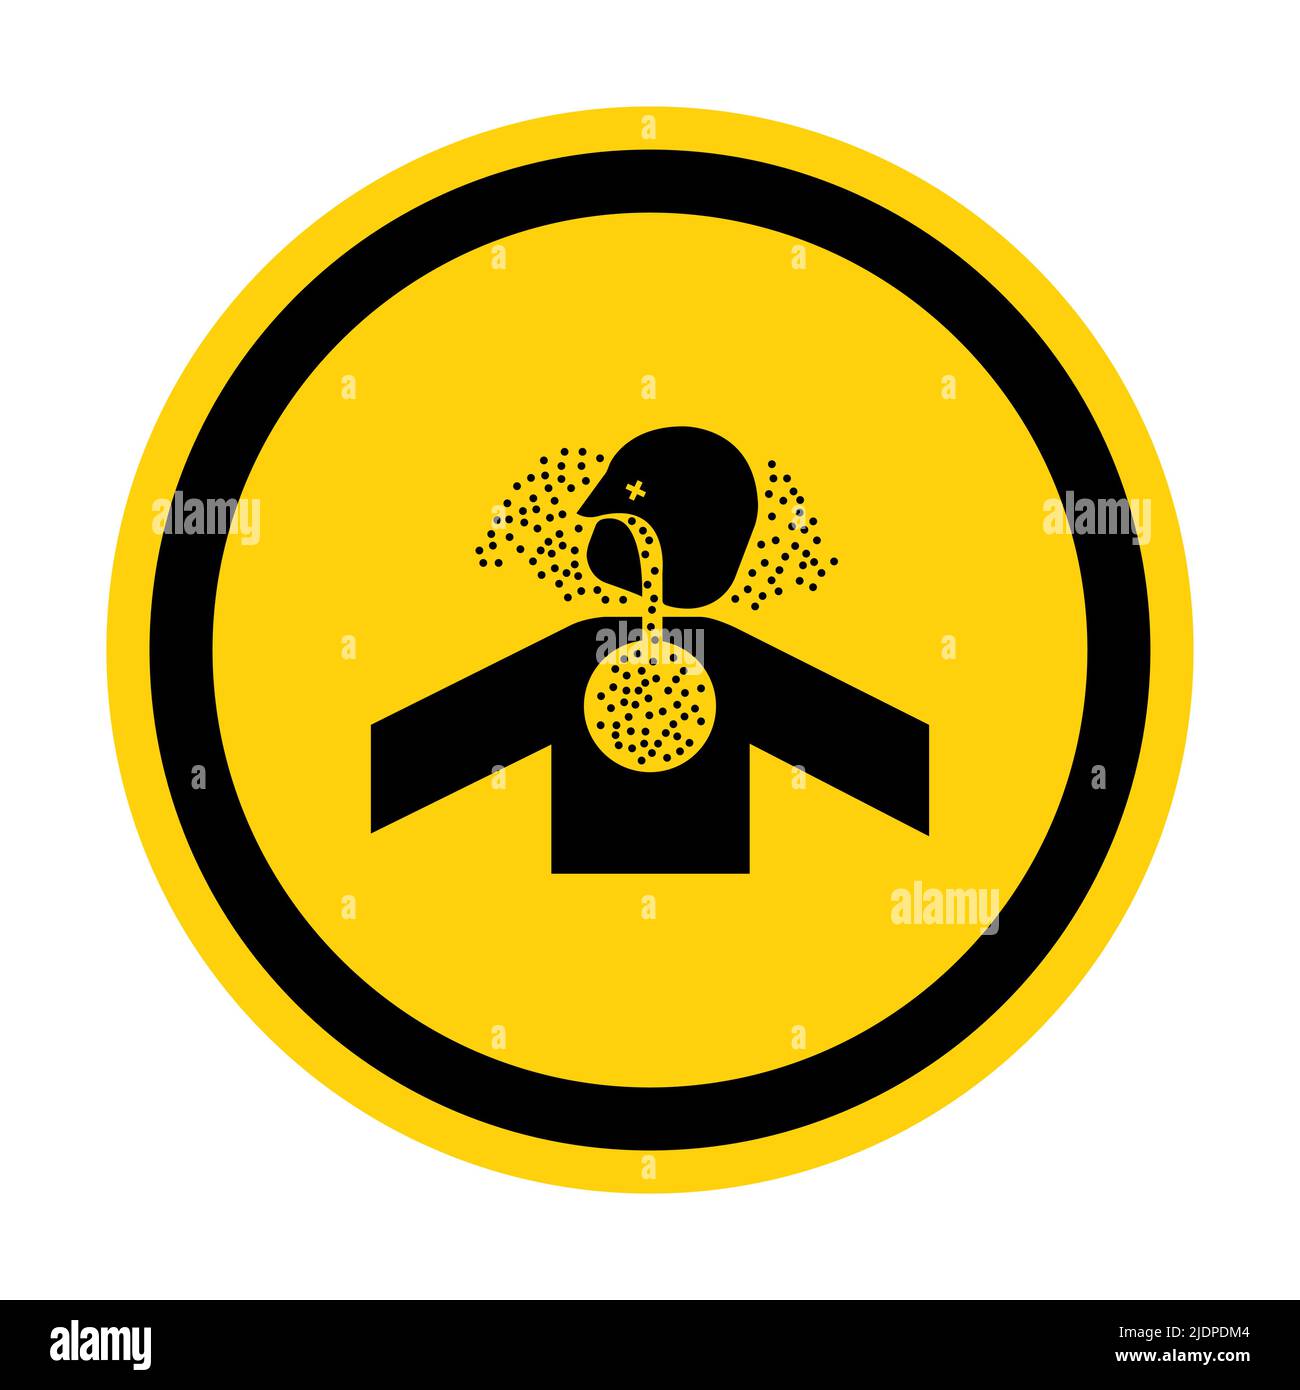 Toxic Gases Asphyxiation Symbol Sign Isolate on White Background,Vector Illustration Stock Vector